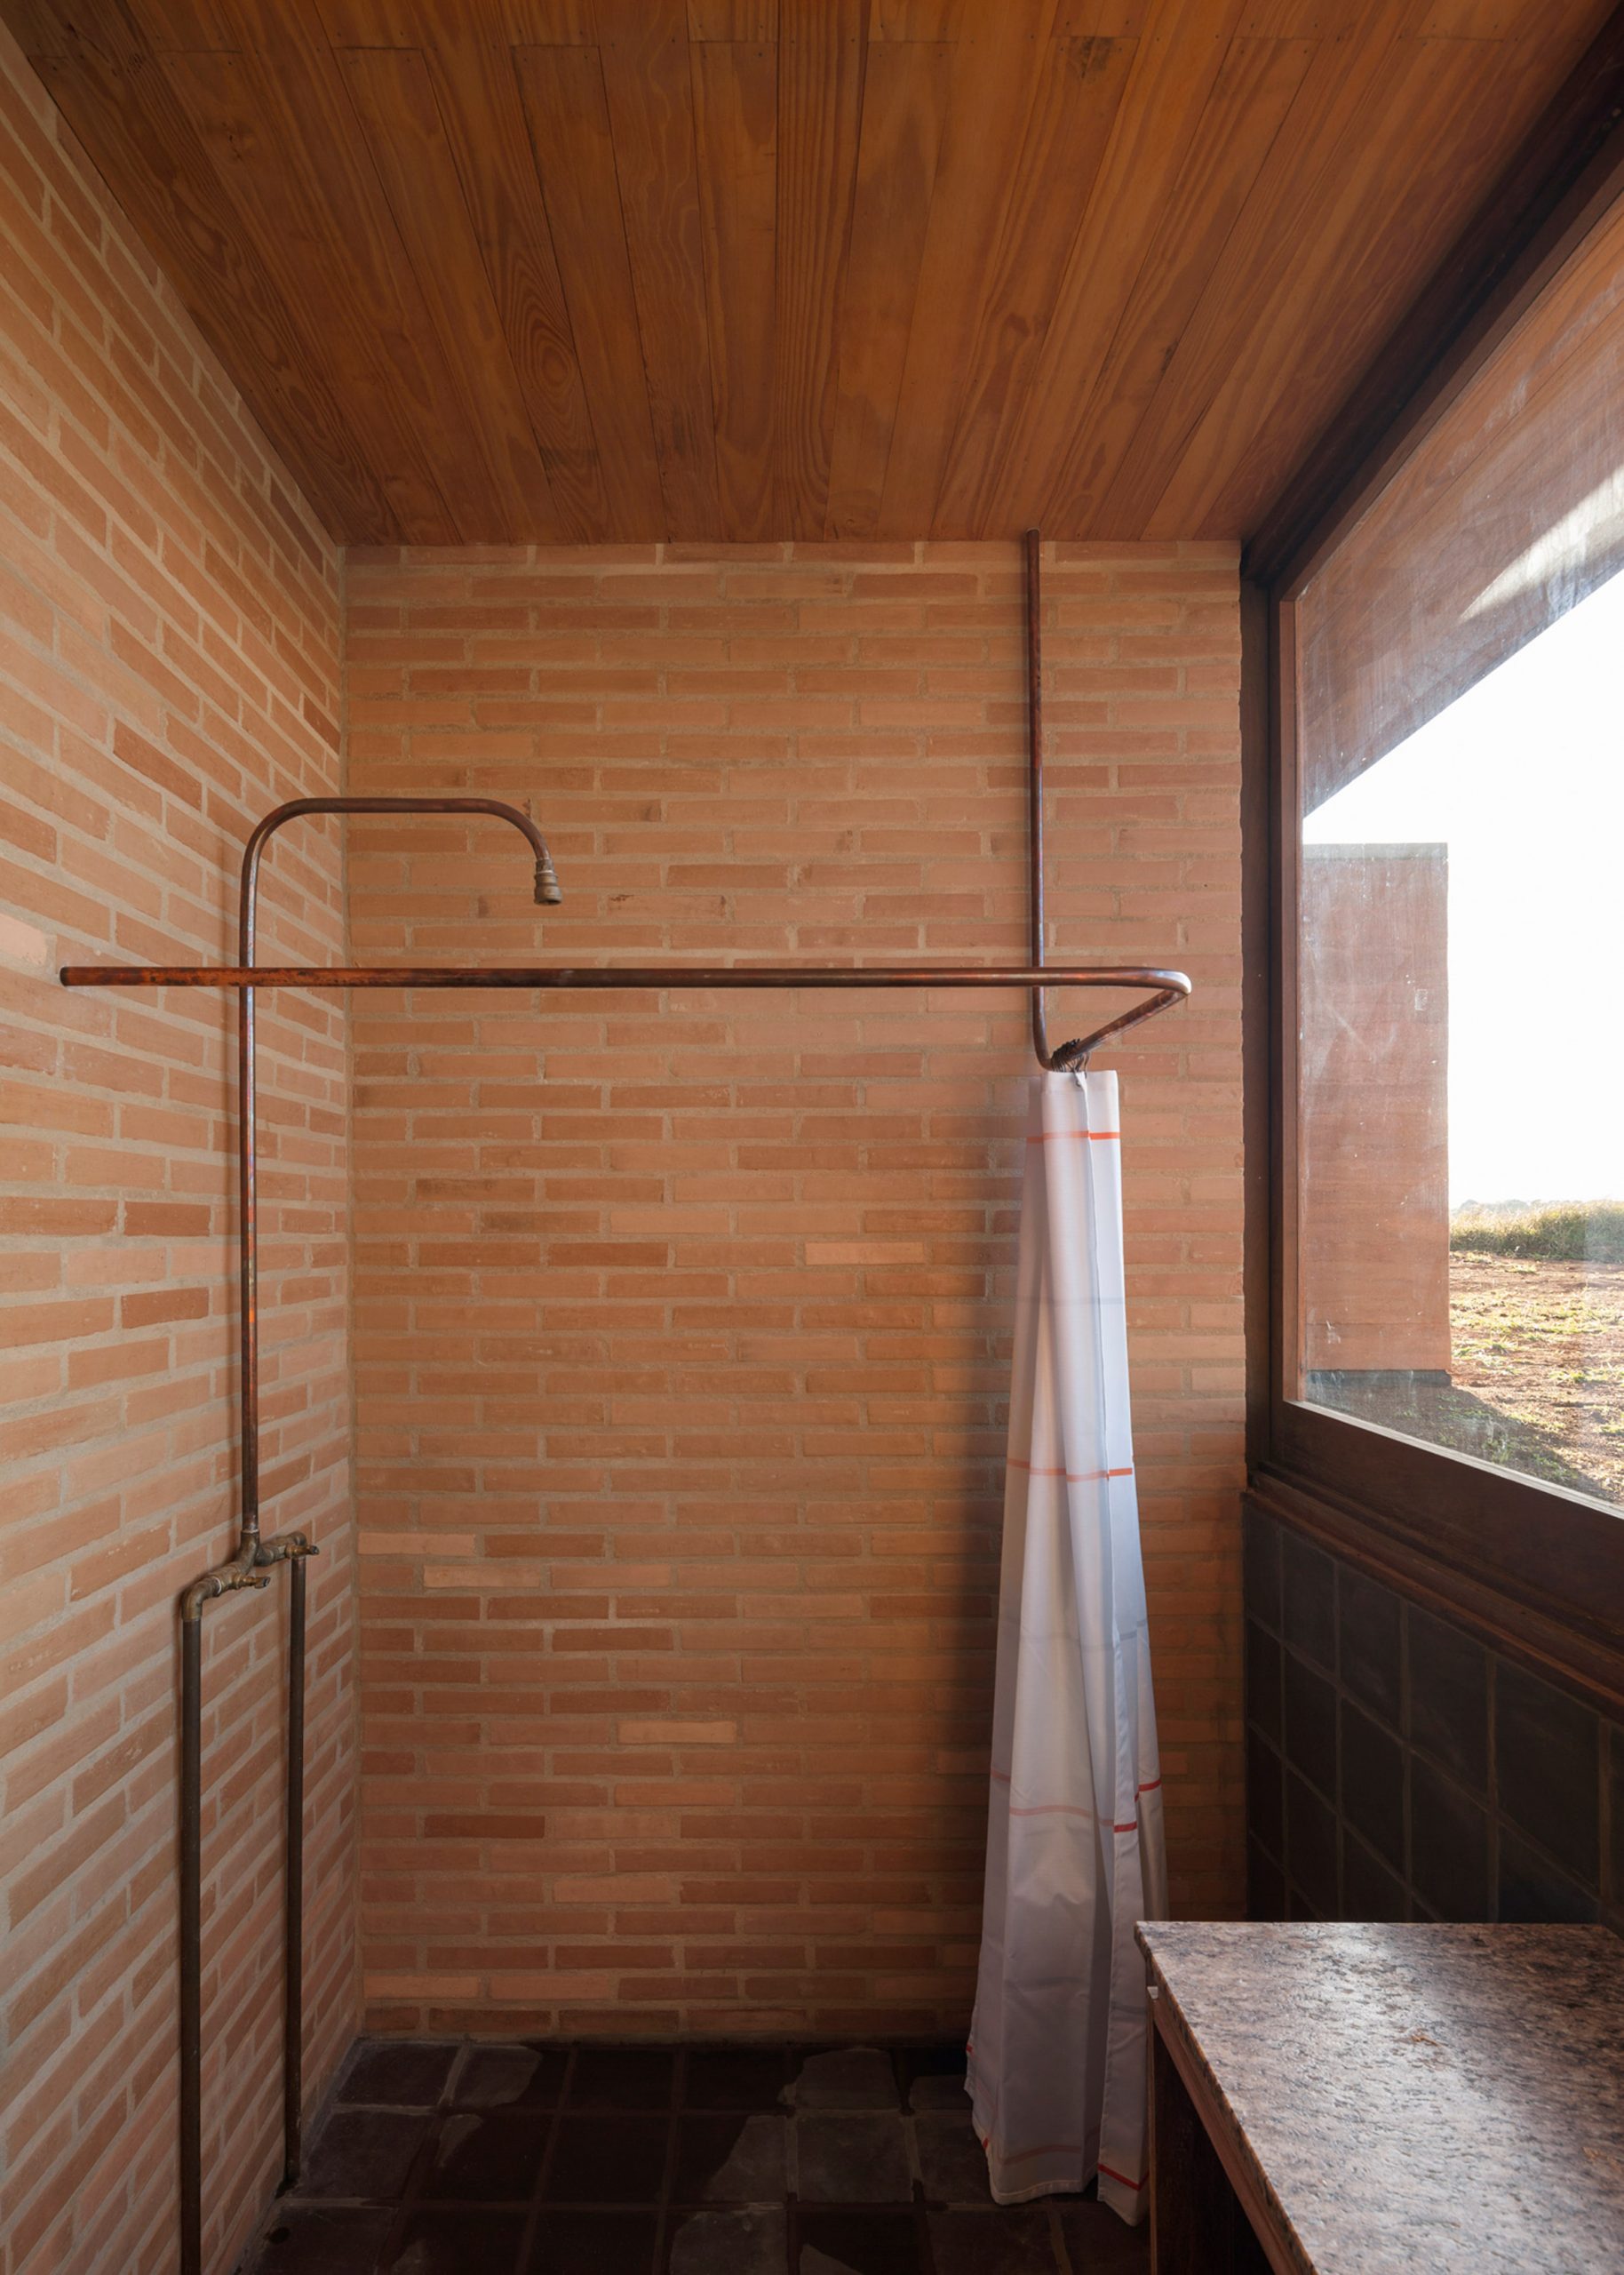 Brick-clad shower room with countryside view